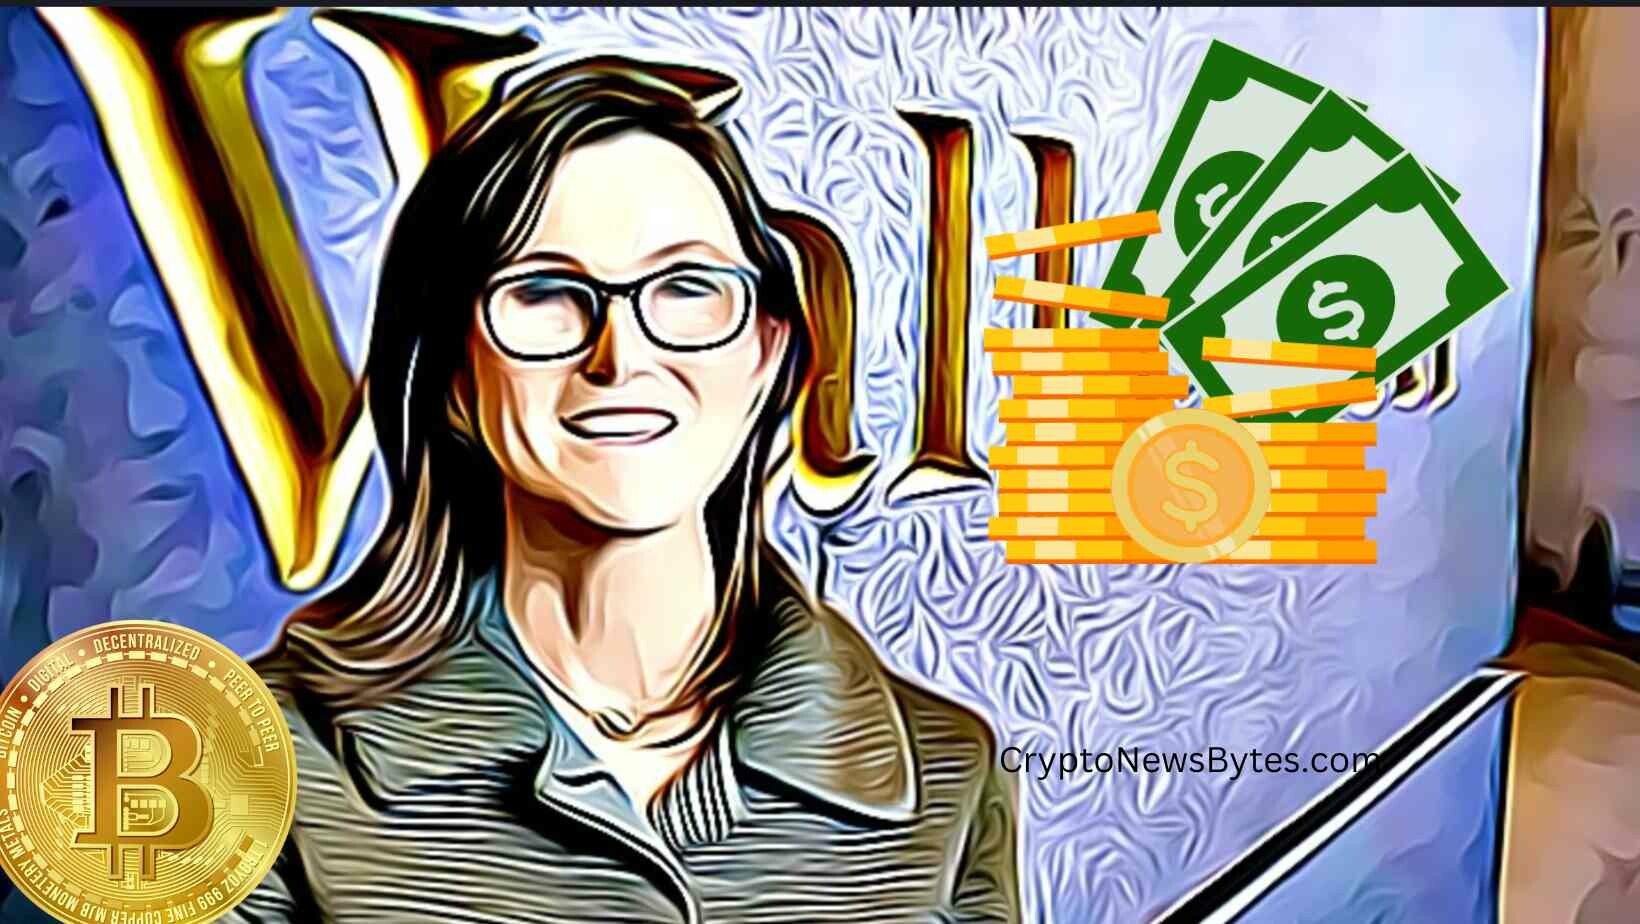 CRYPTONEWSBYTES.COM Cathie-Wood-crypto Is Cathie Woods the New Elon Musk? A Look Into Ark Invest's Latest Purchases  